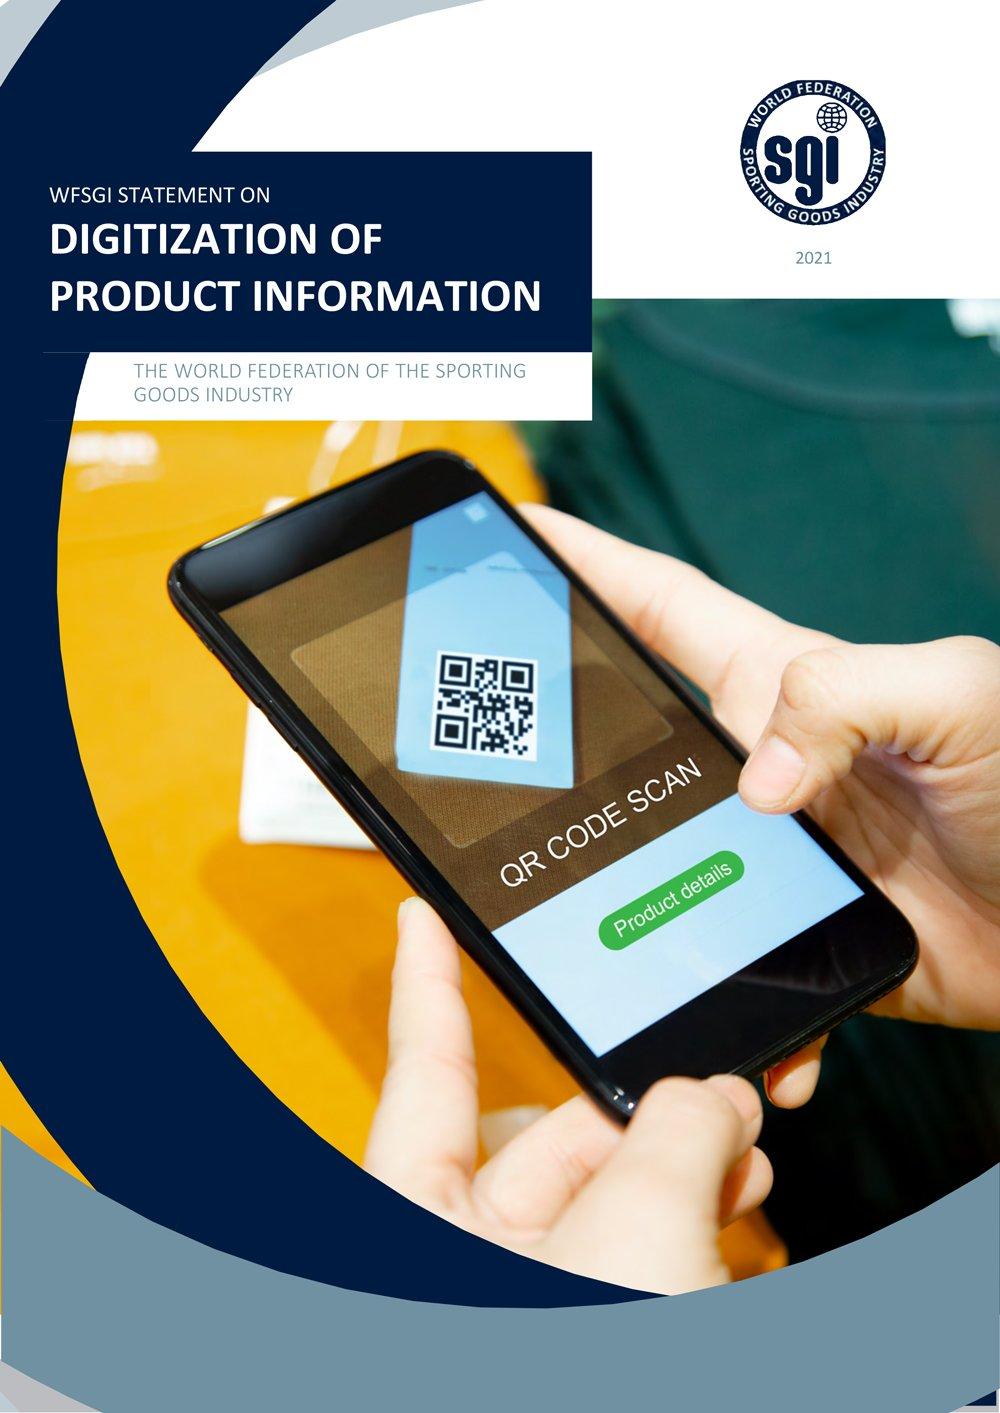 Product: WFSGI AIMS TO DRIVE FORWARD DIGITIZATION OF PRODUCT INFORMATION | WFSGI